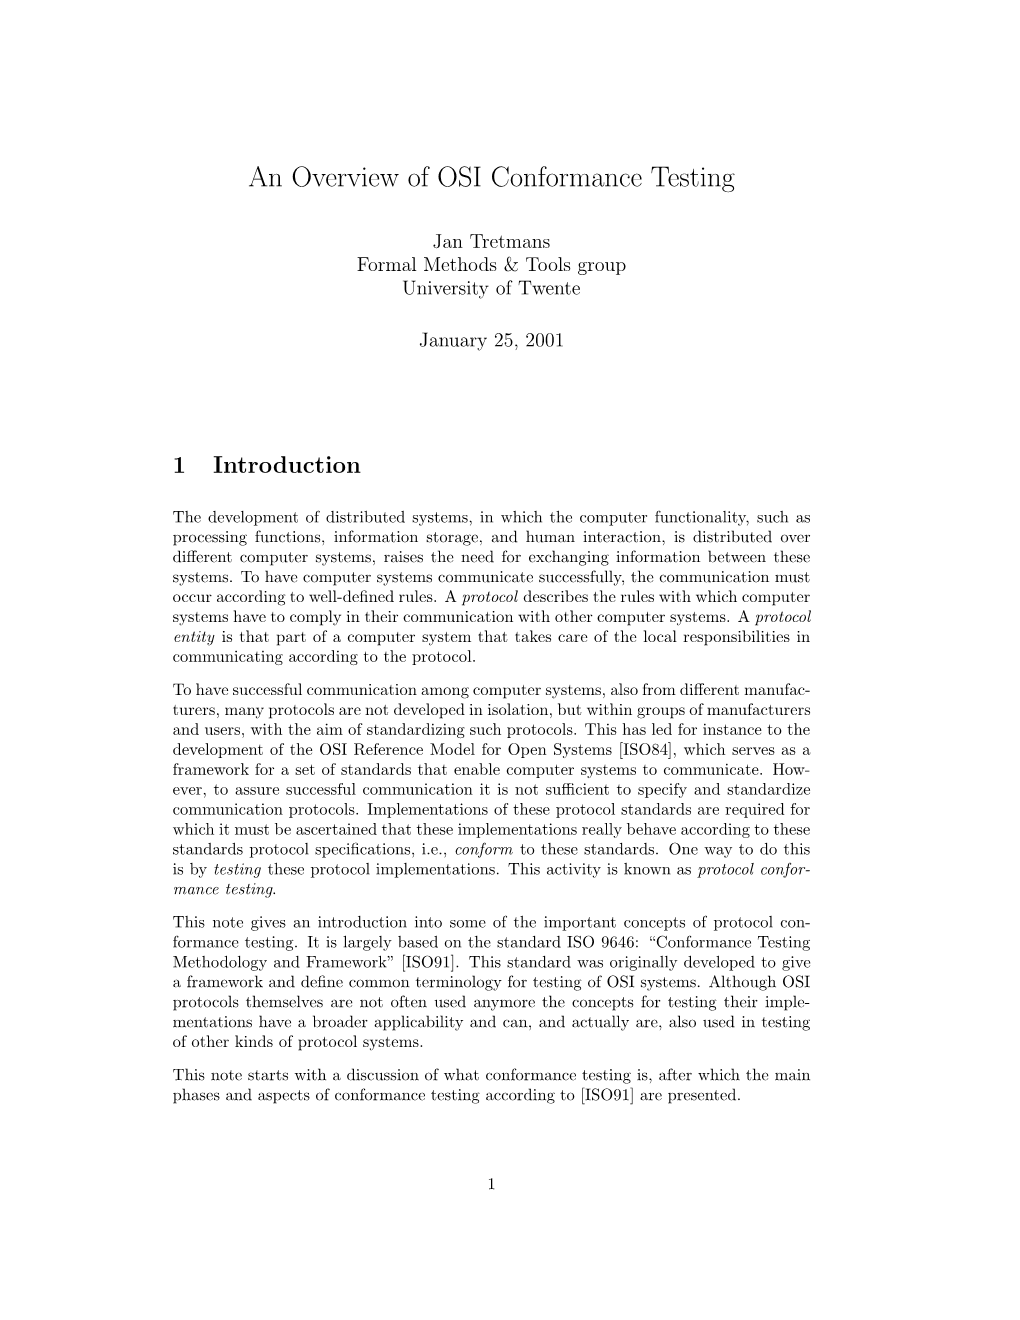 An Overview of OSI Conformance Testing